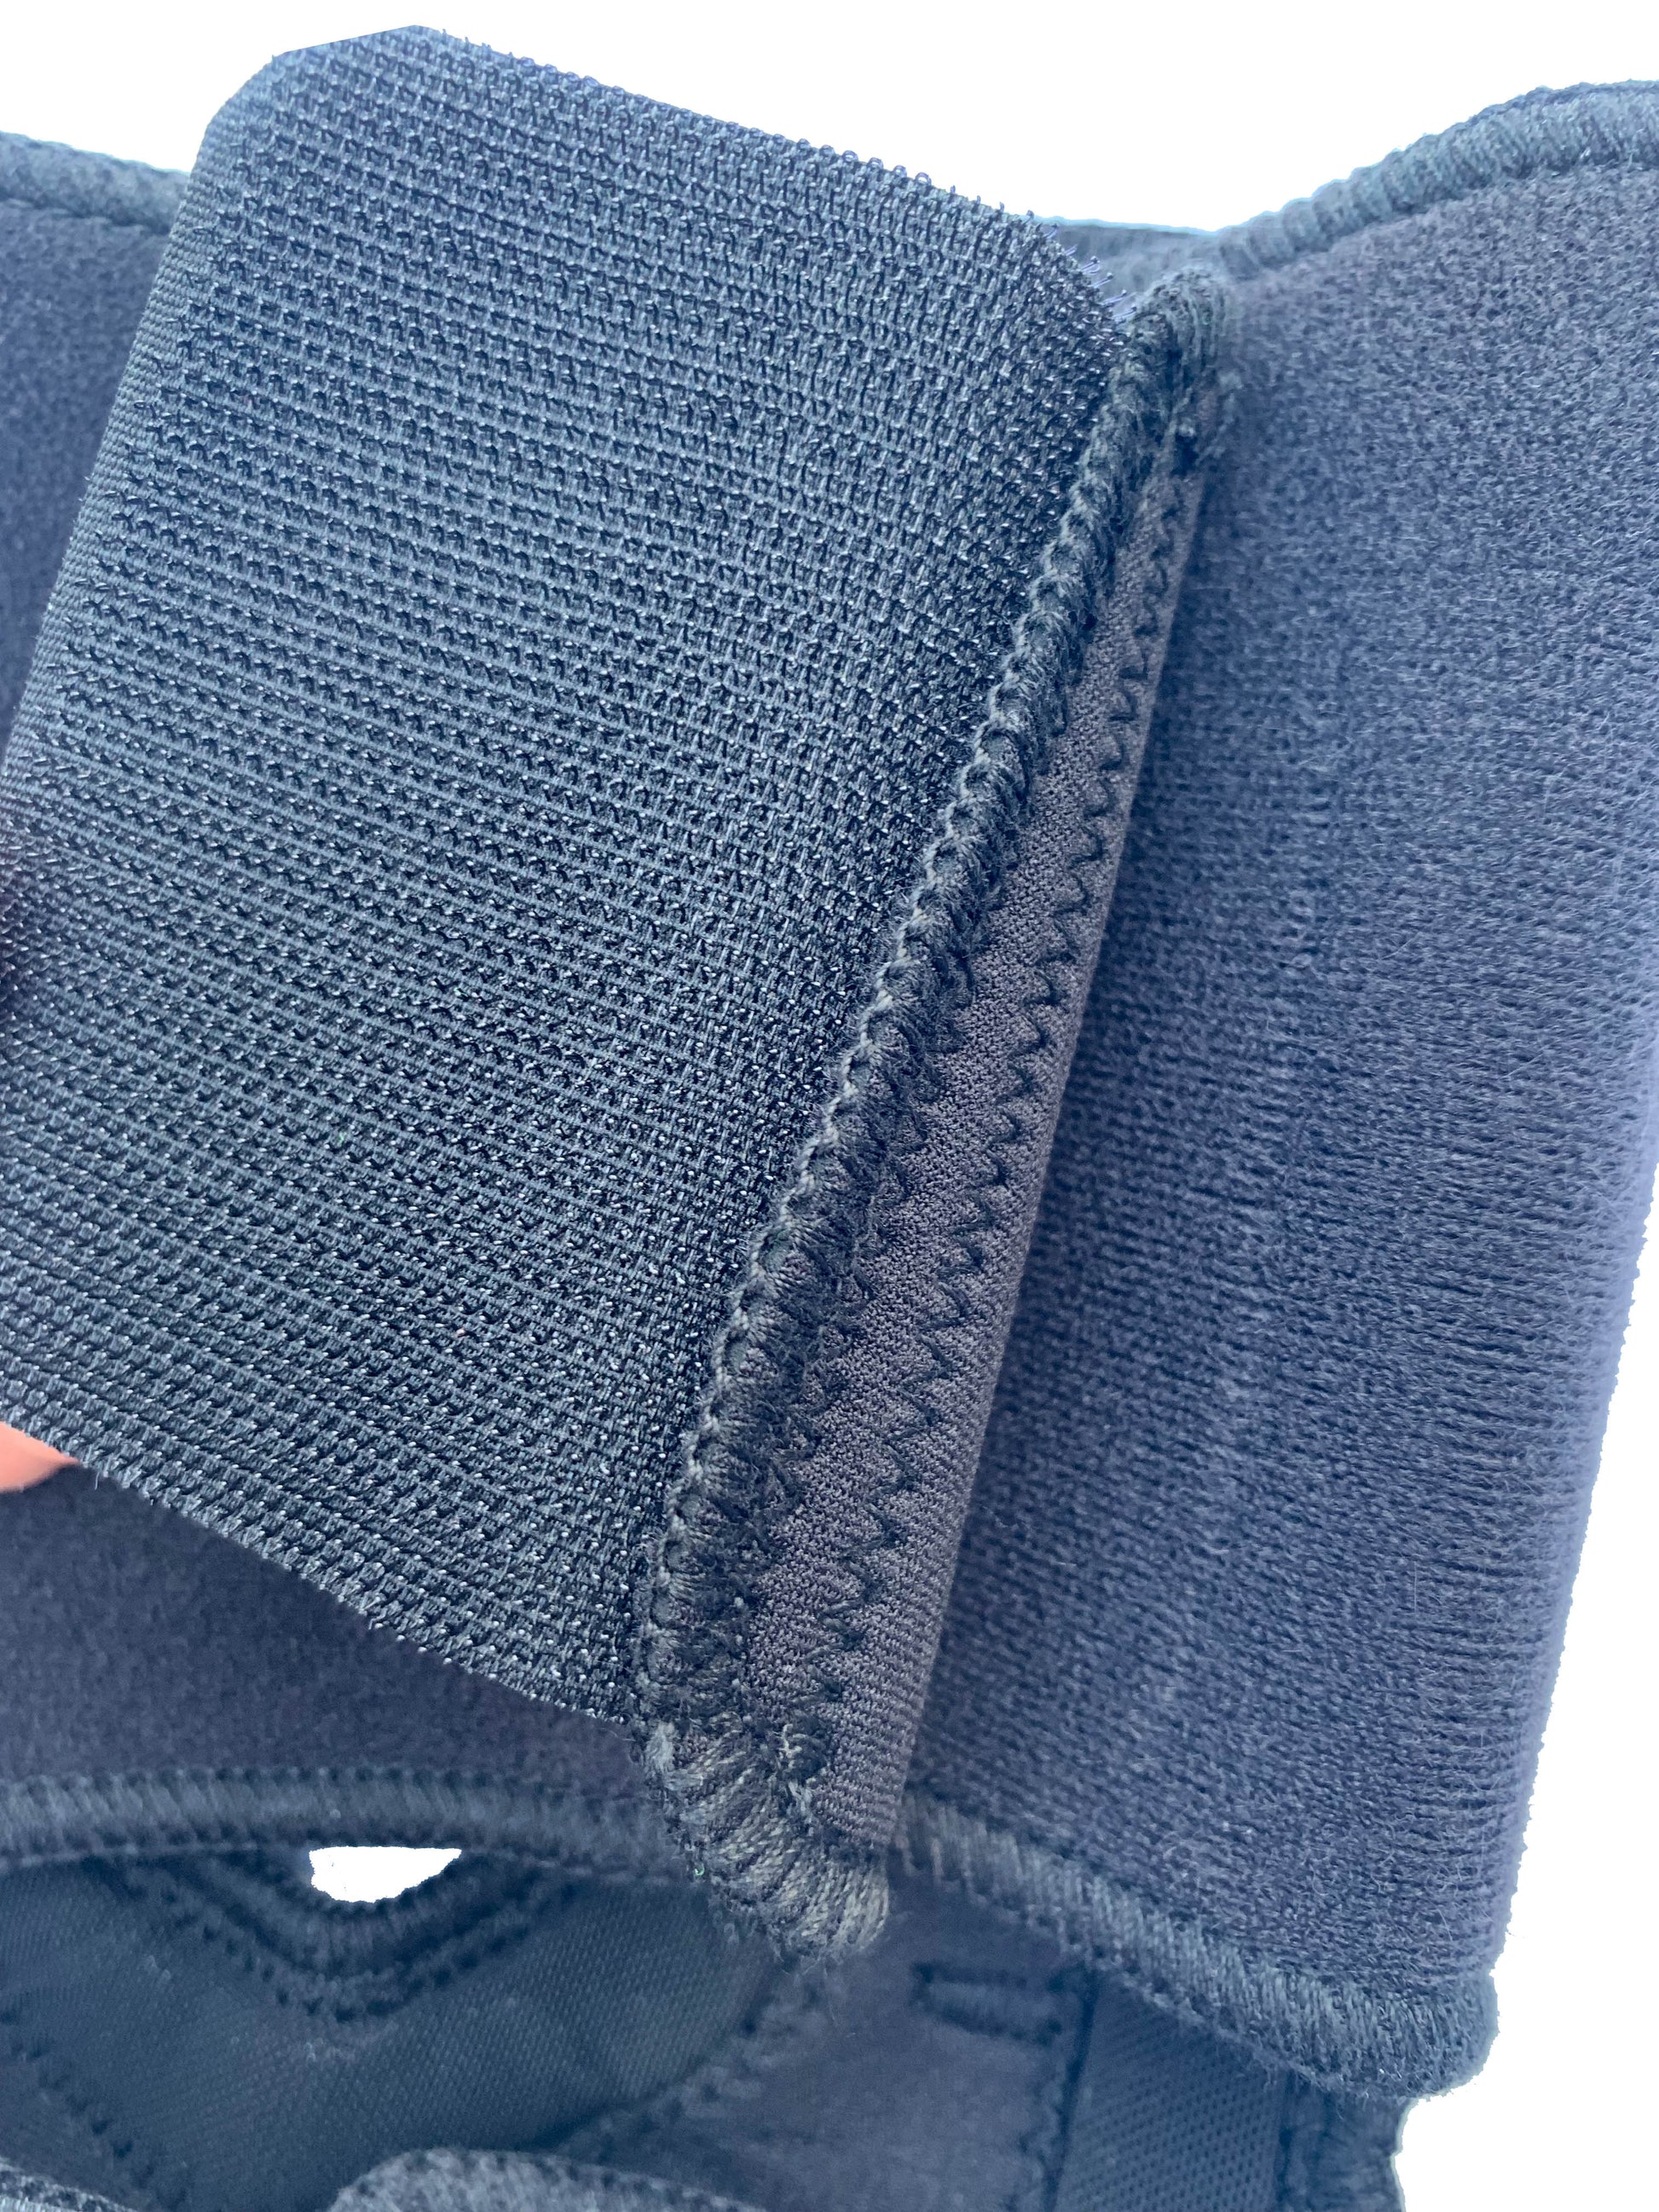 The Bio Magnetic Elbow Support adhesive closure up close. Showing the inside of the hook eye closure and the quality of the stitching. 